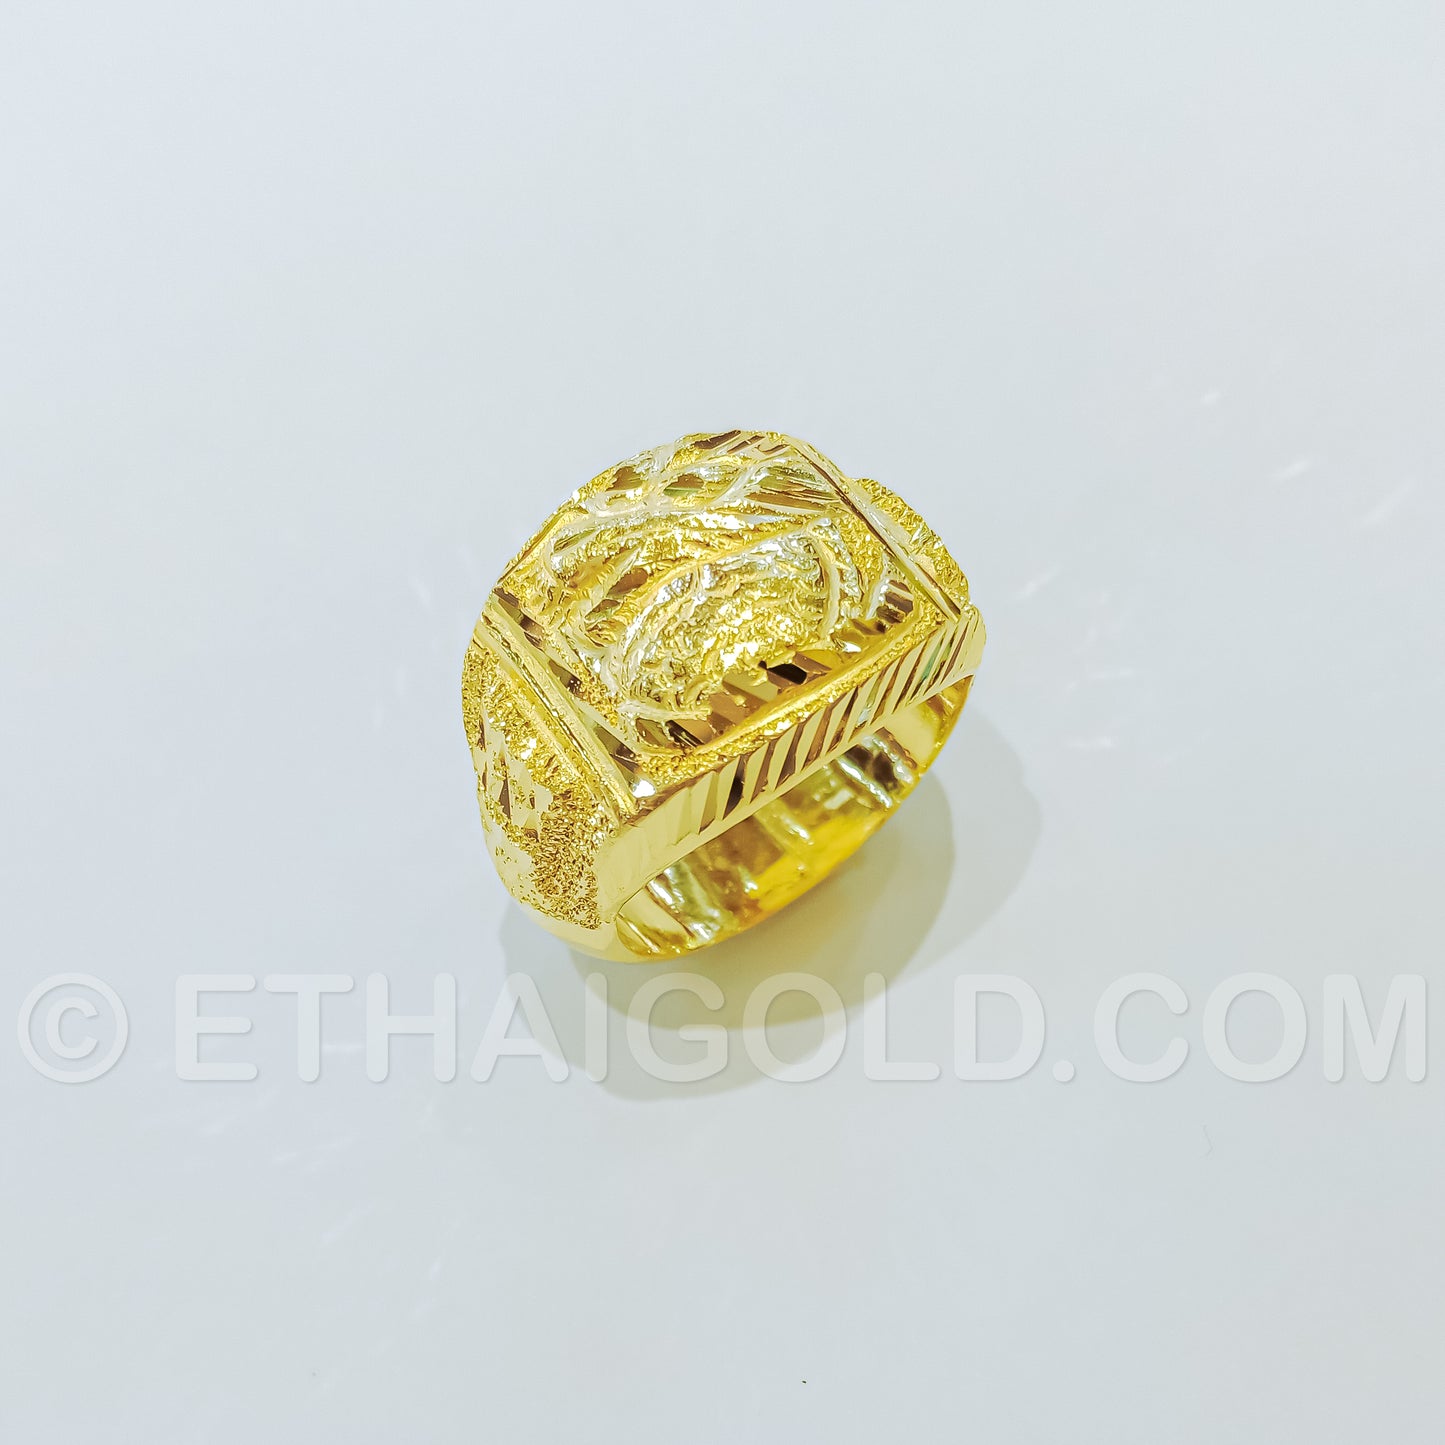 1 BAHT POLISHED SPARKLING DIAMOND-CUT HOLLOW SQUARE DRAGON RING IN 23K GOLD (ID: R1501B)